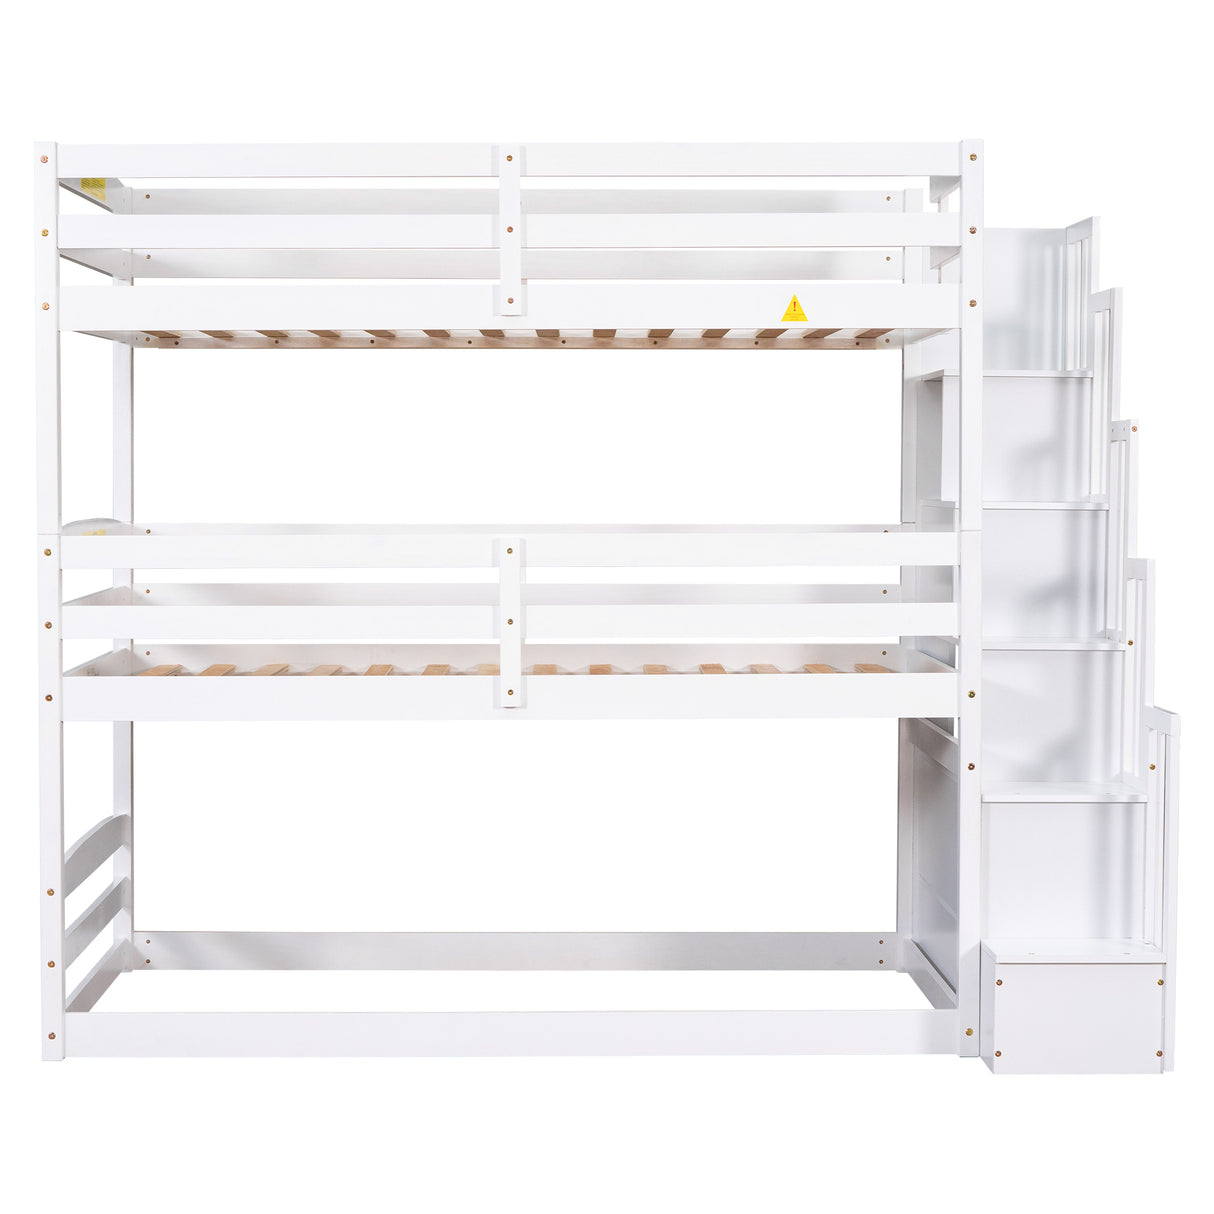 Twin Size Triple Bunk Bed with Storage Staircase,Separate Design,White - Home Elegance USA